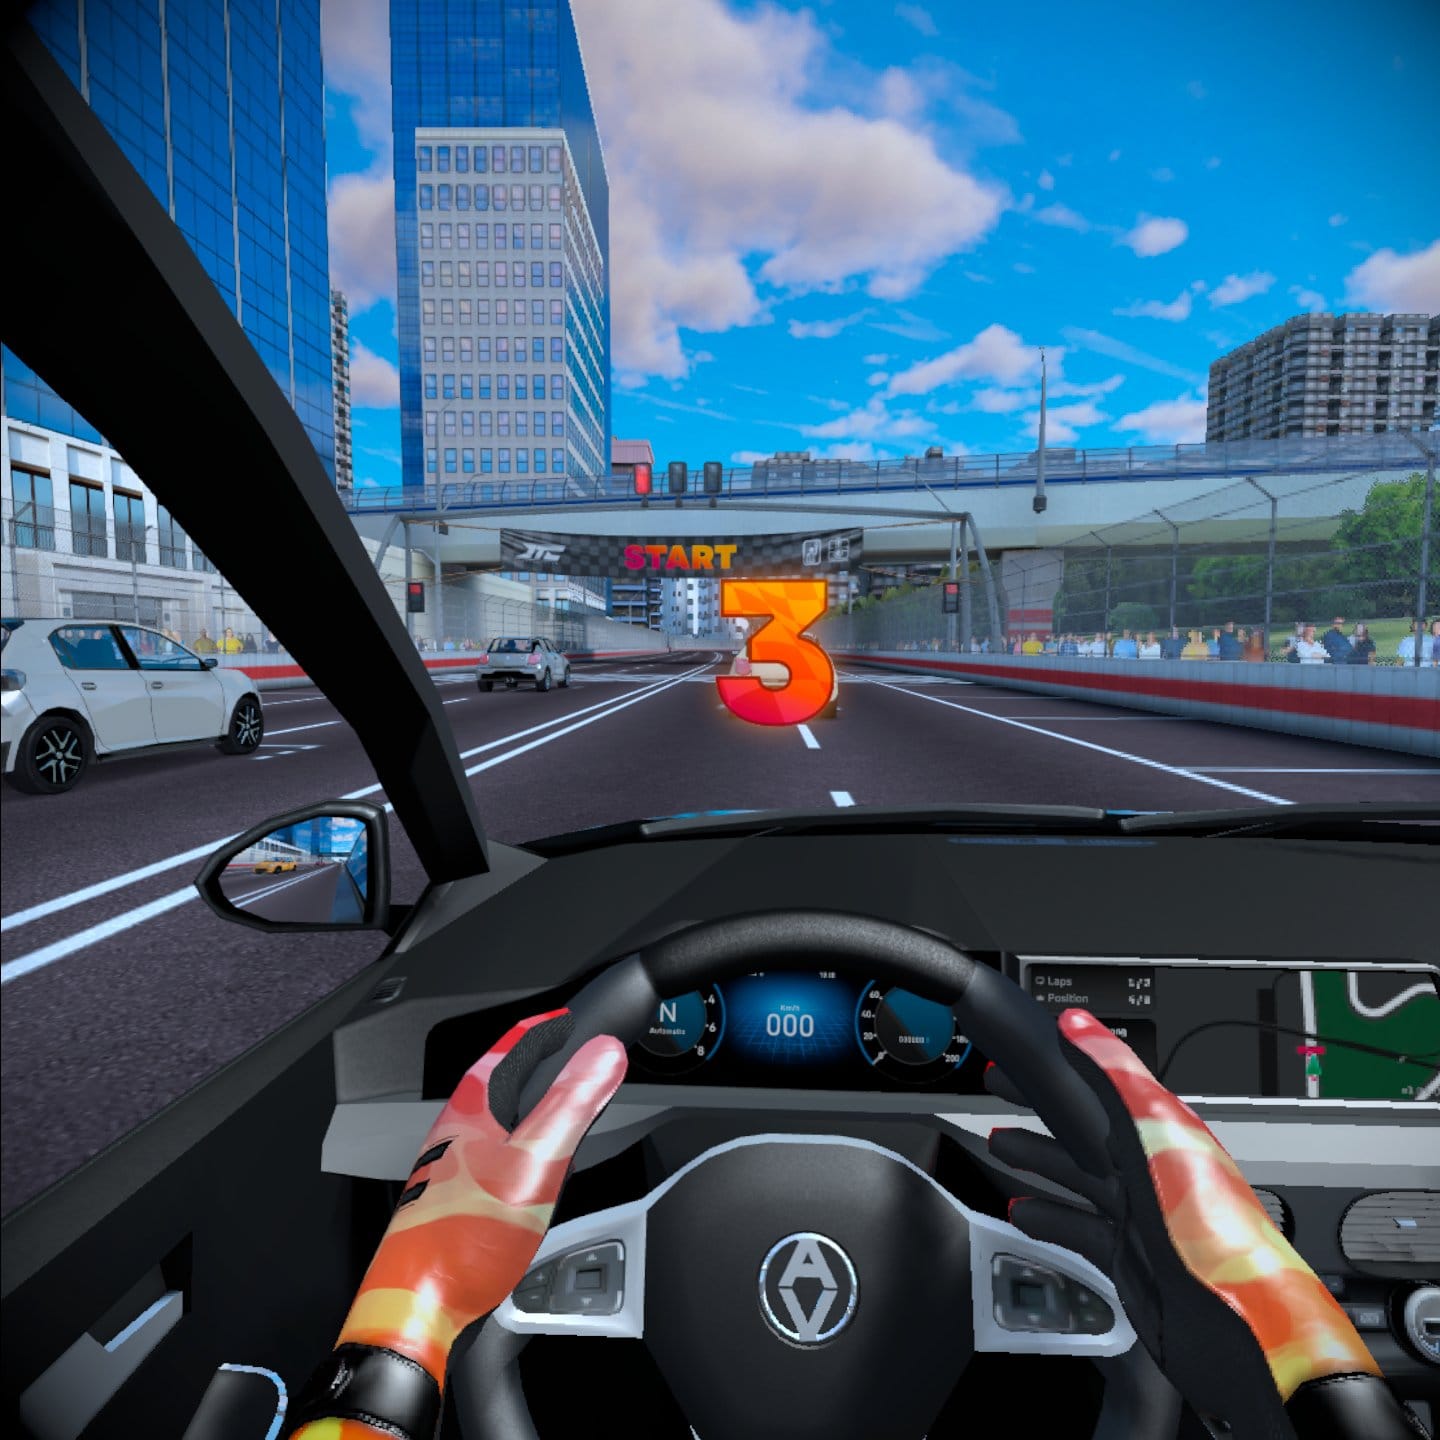 The player's perspective in Downtown Club, a VR racing game. Sitting in the drivers seat with hands on the wheel, a race track in the city, with tall buildings and blue skies.